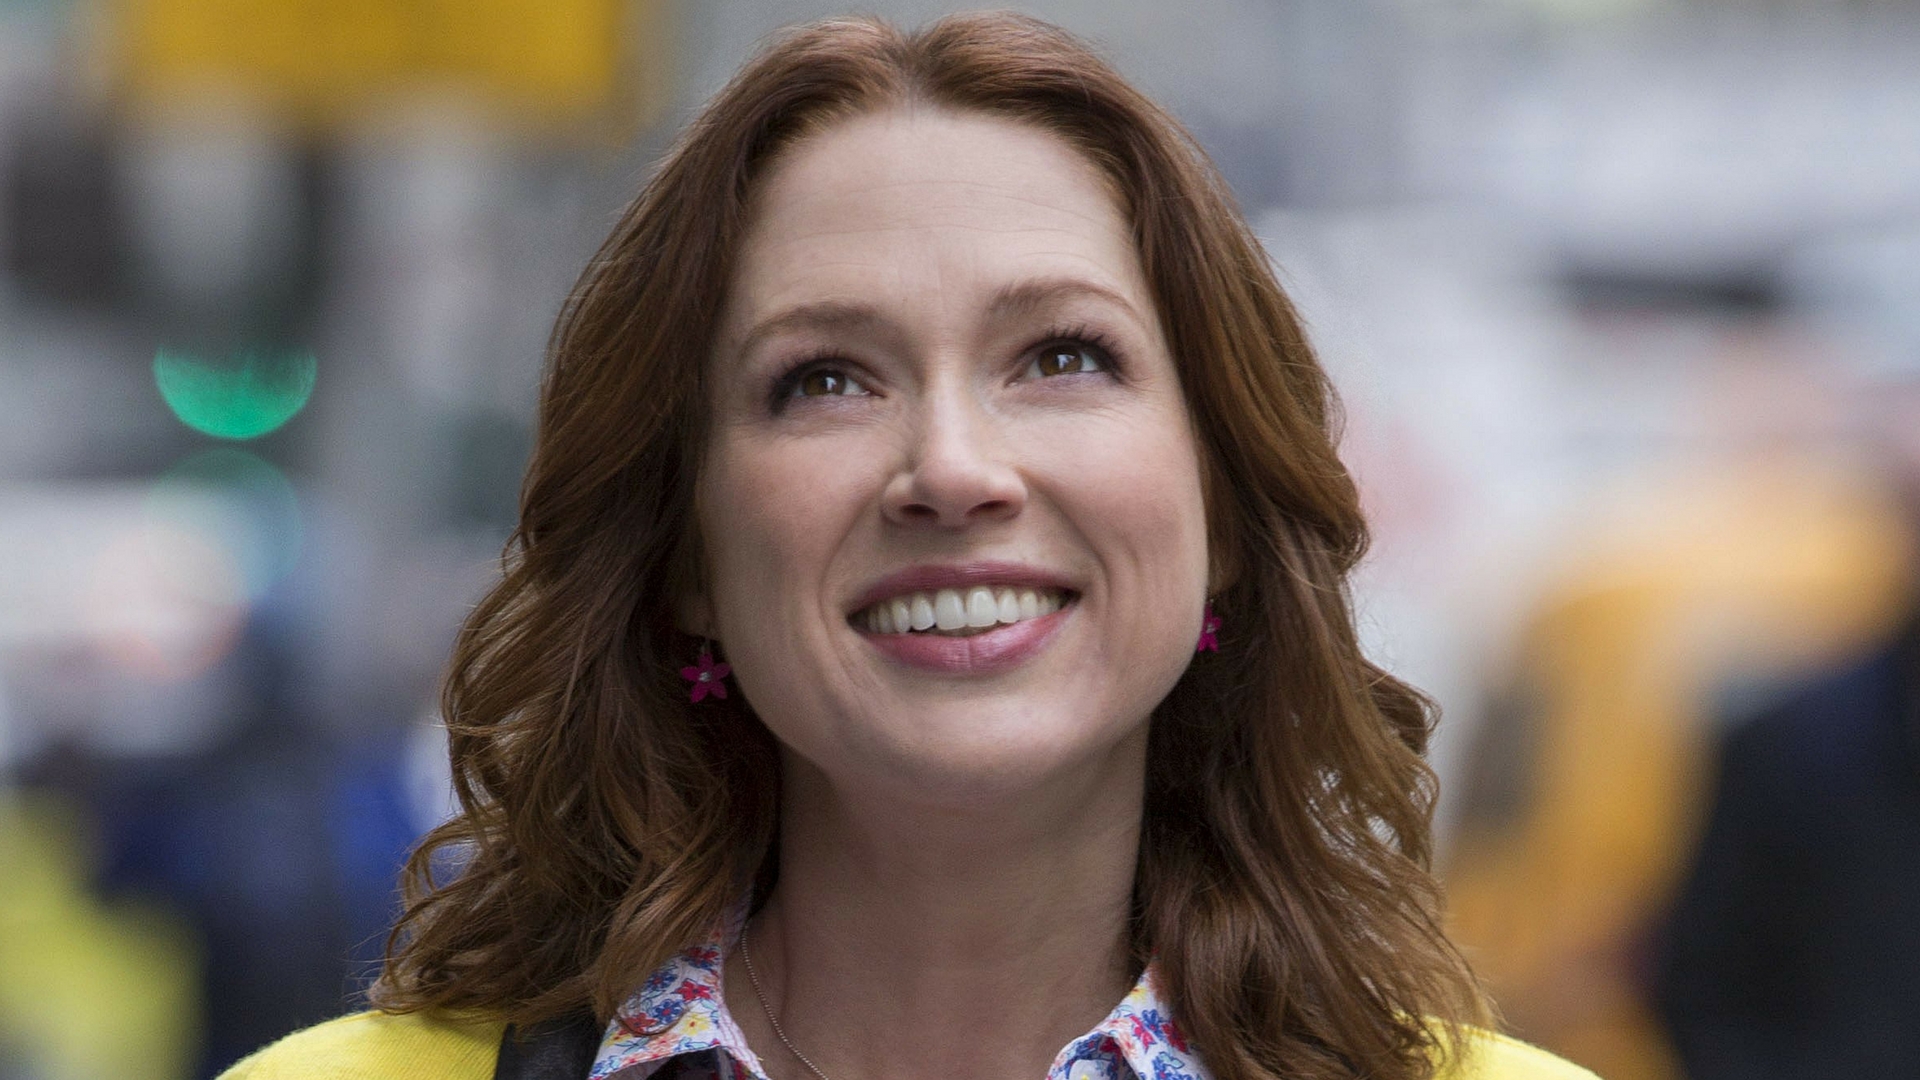 Unbreakable Kimmy Schmidt to end after season 4